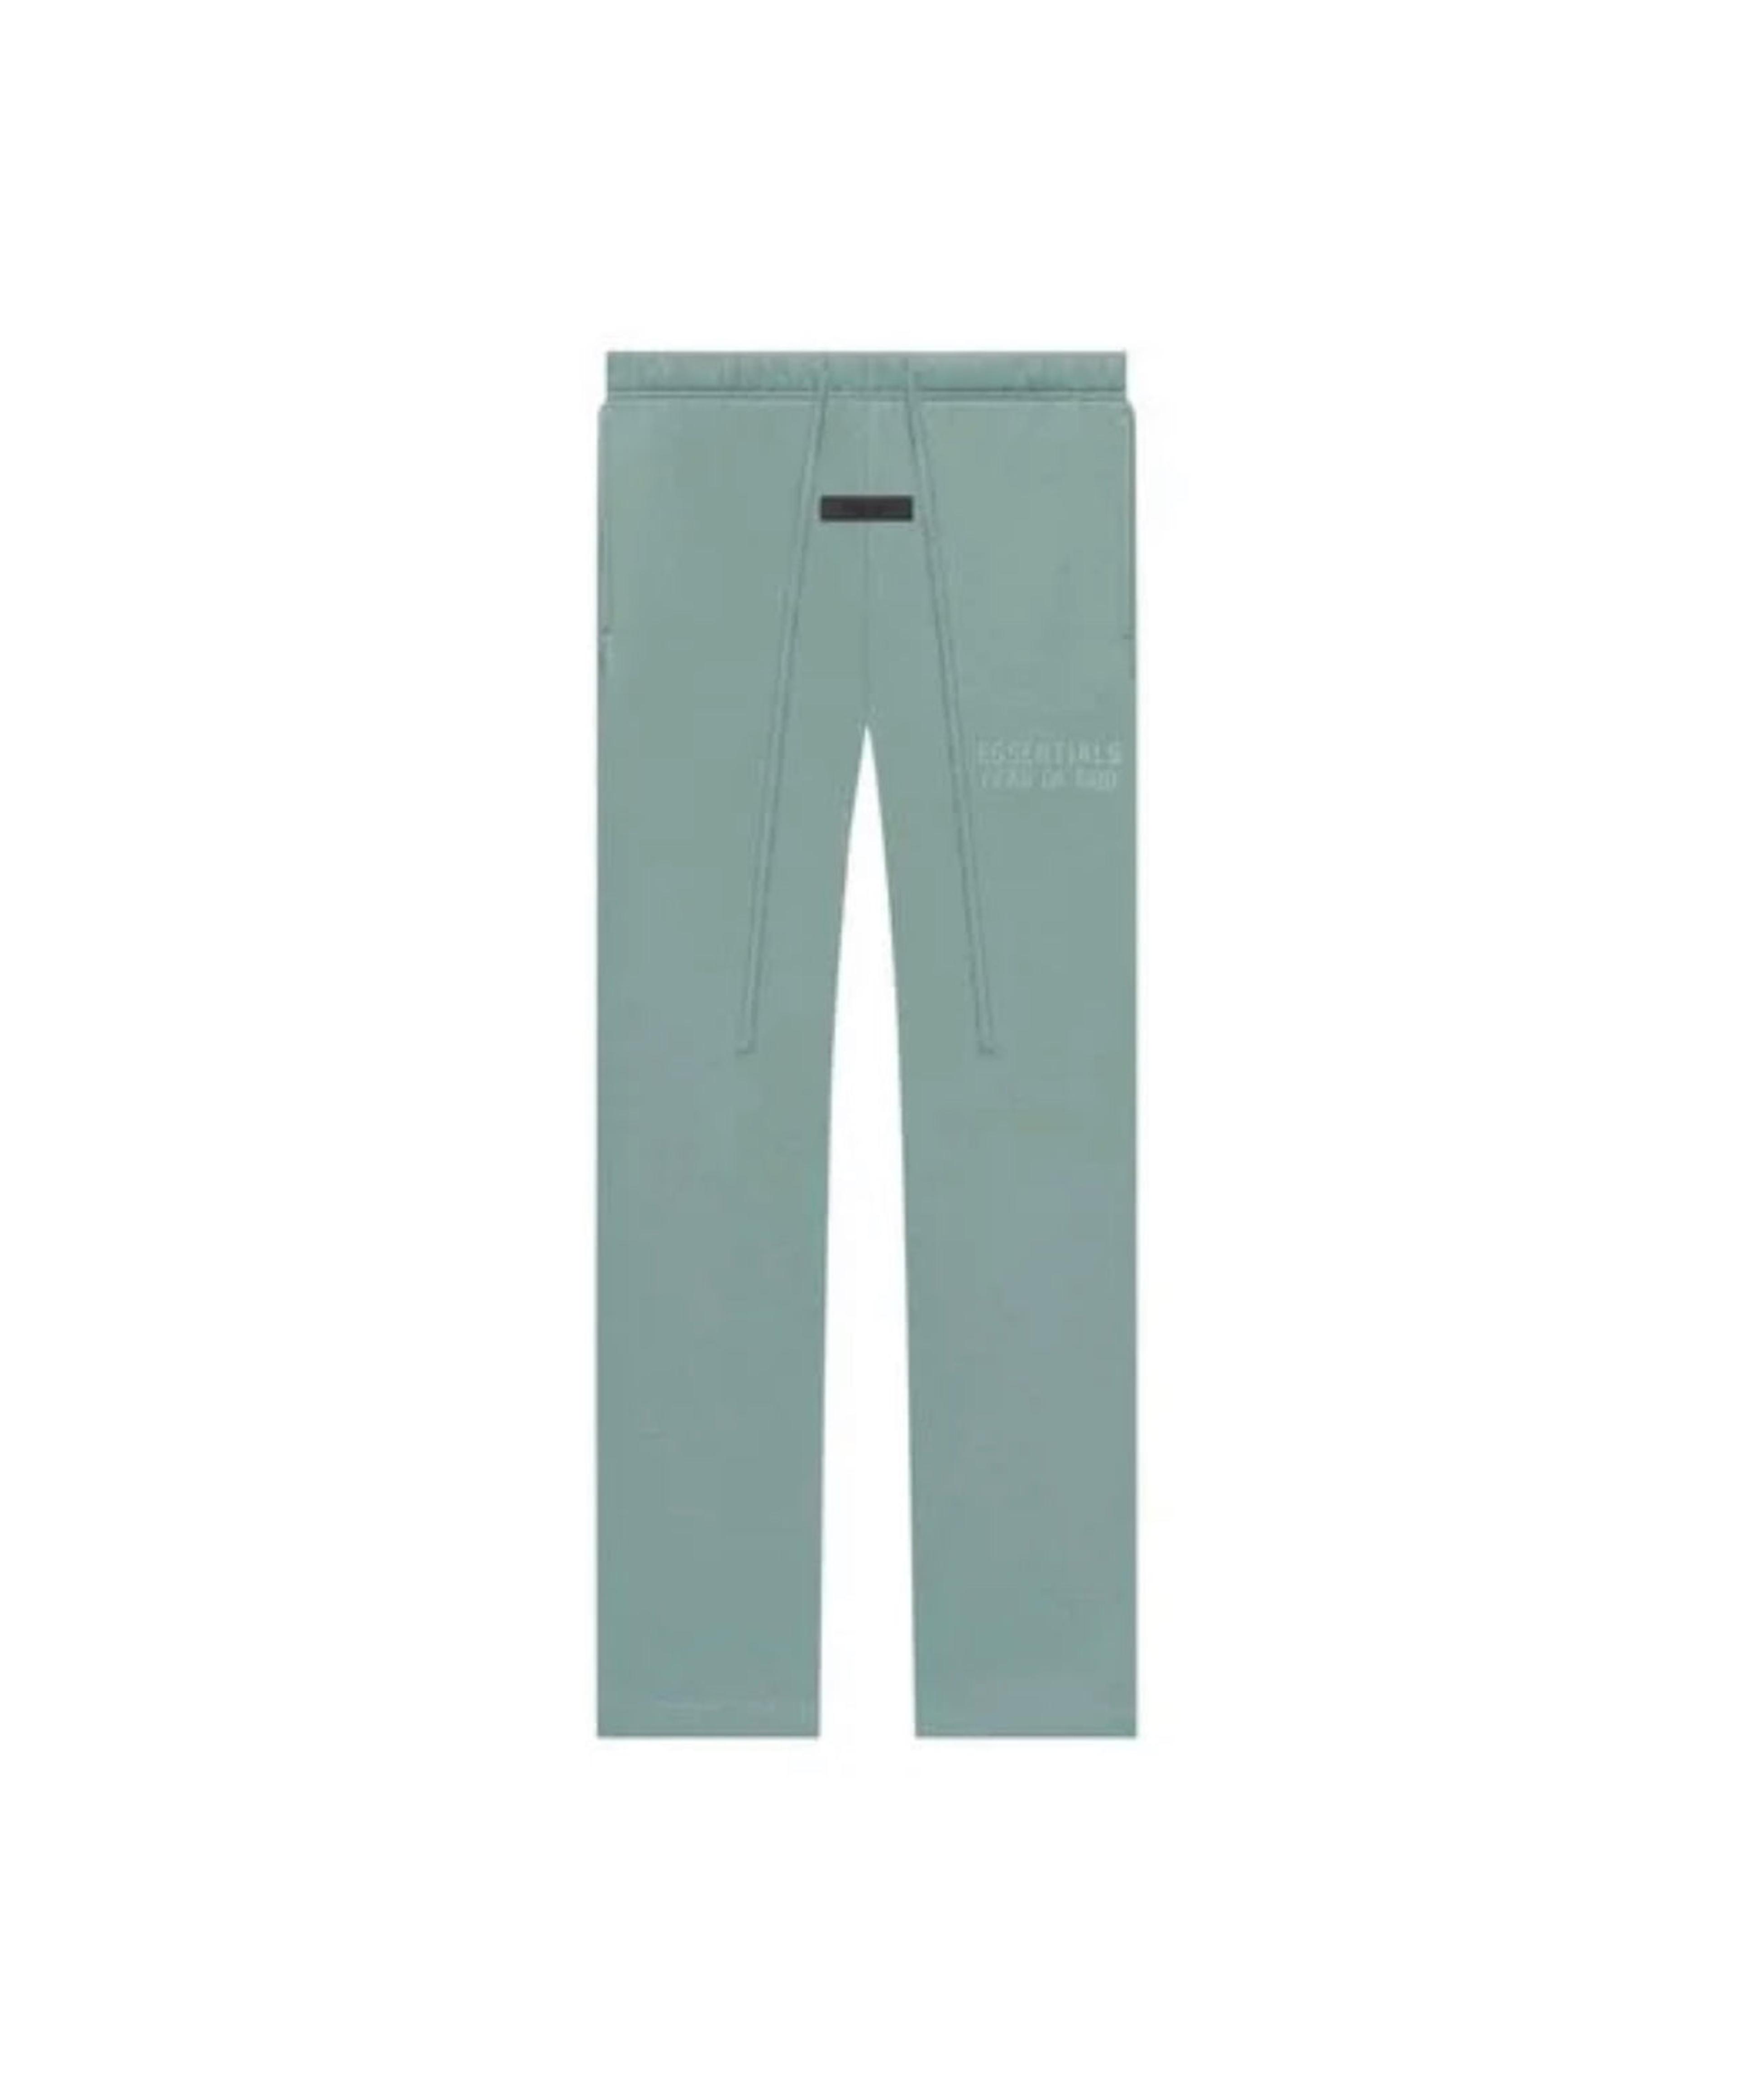 Fear Of God Essentials Sweatpant Sycamore